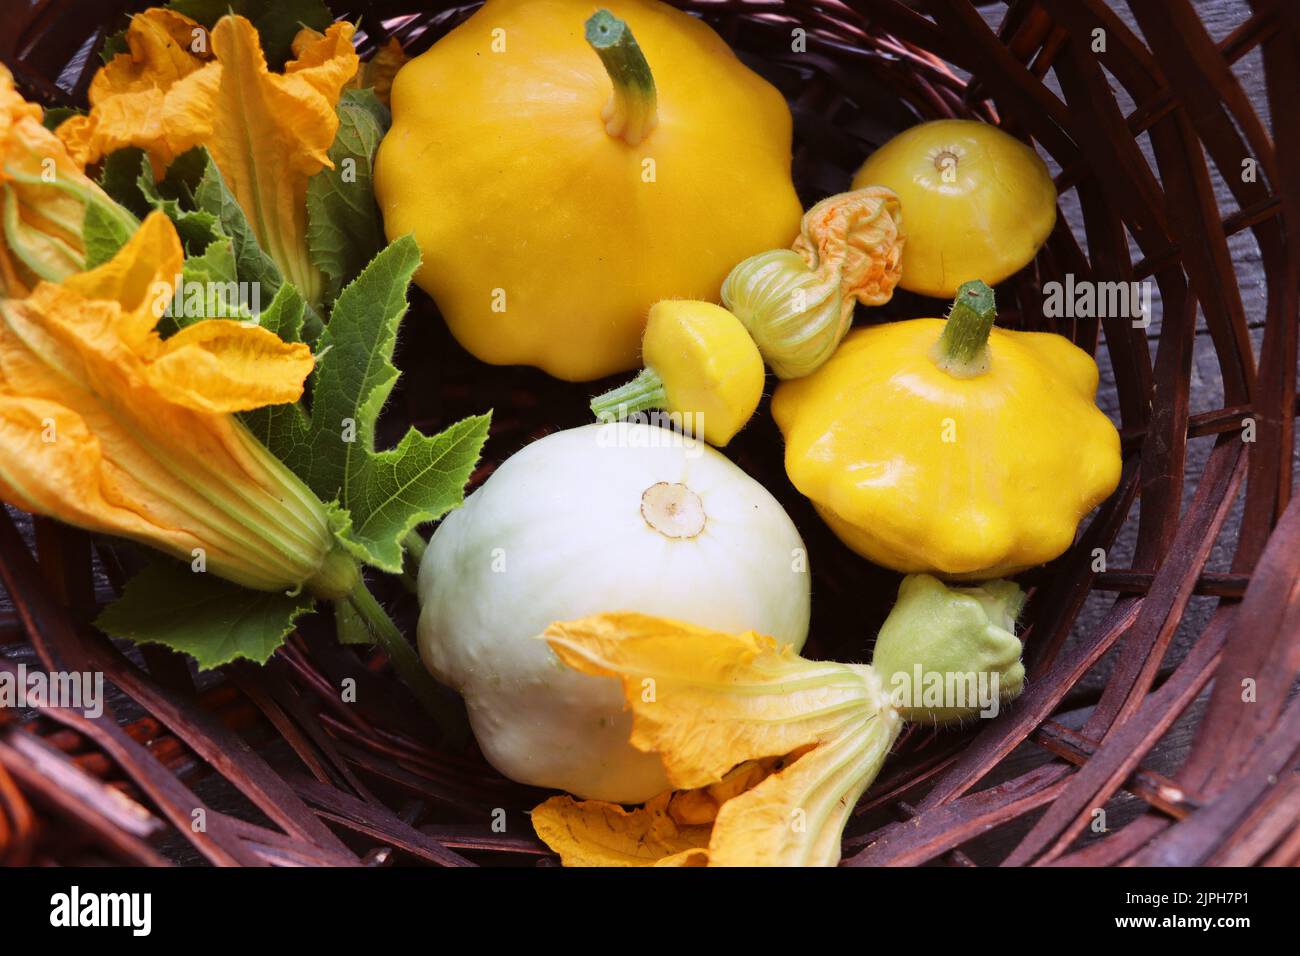 Beautiful yellow and white patissonsin a basket on the table, a fresh crop of vegetables. Top view Stock Photo